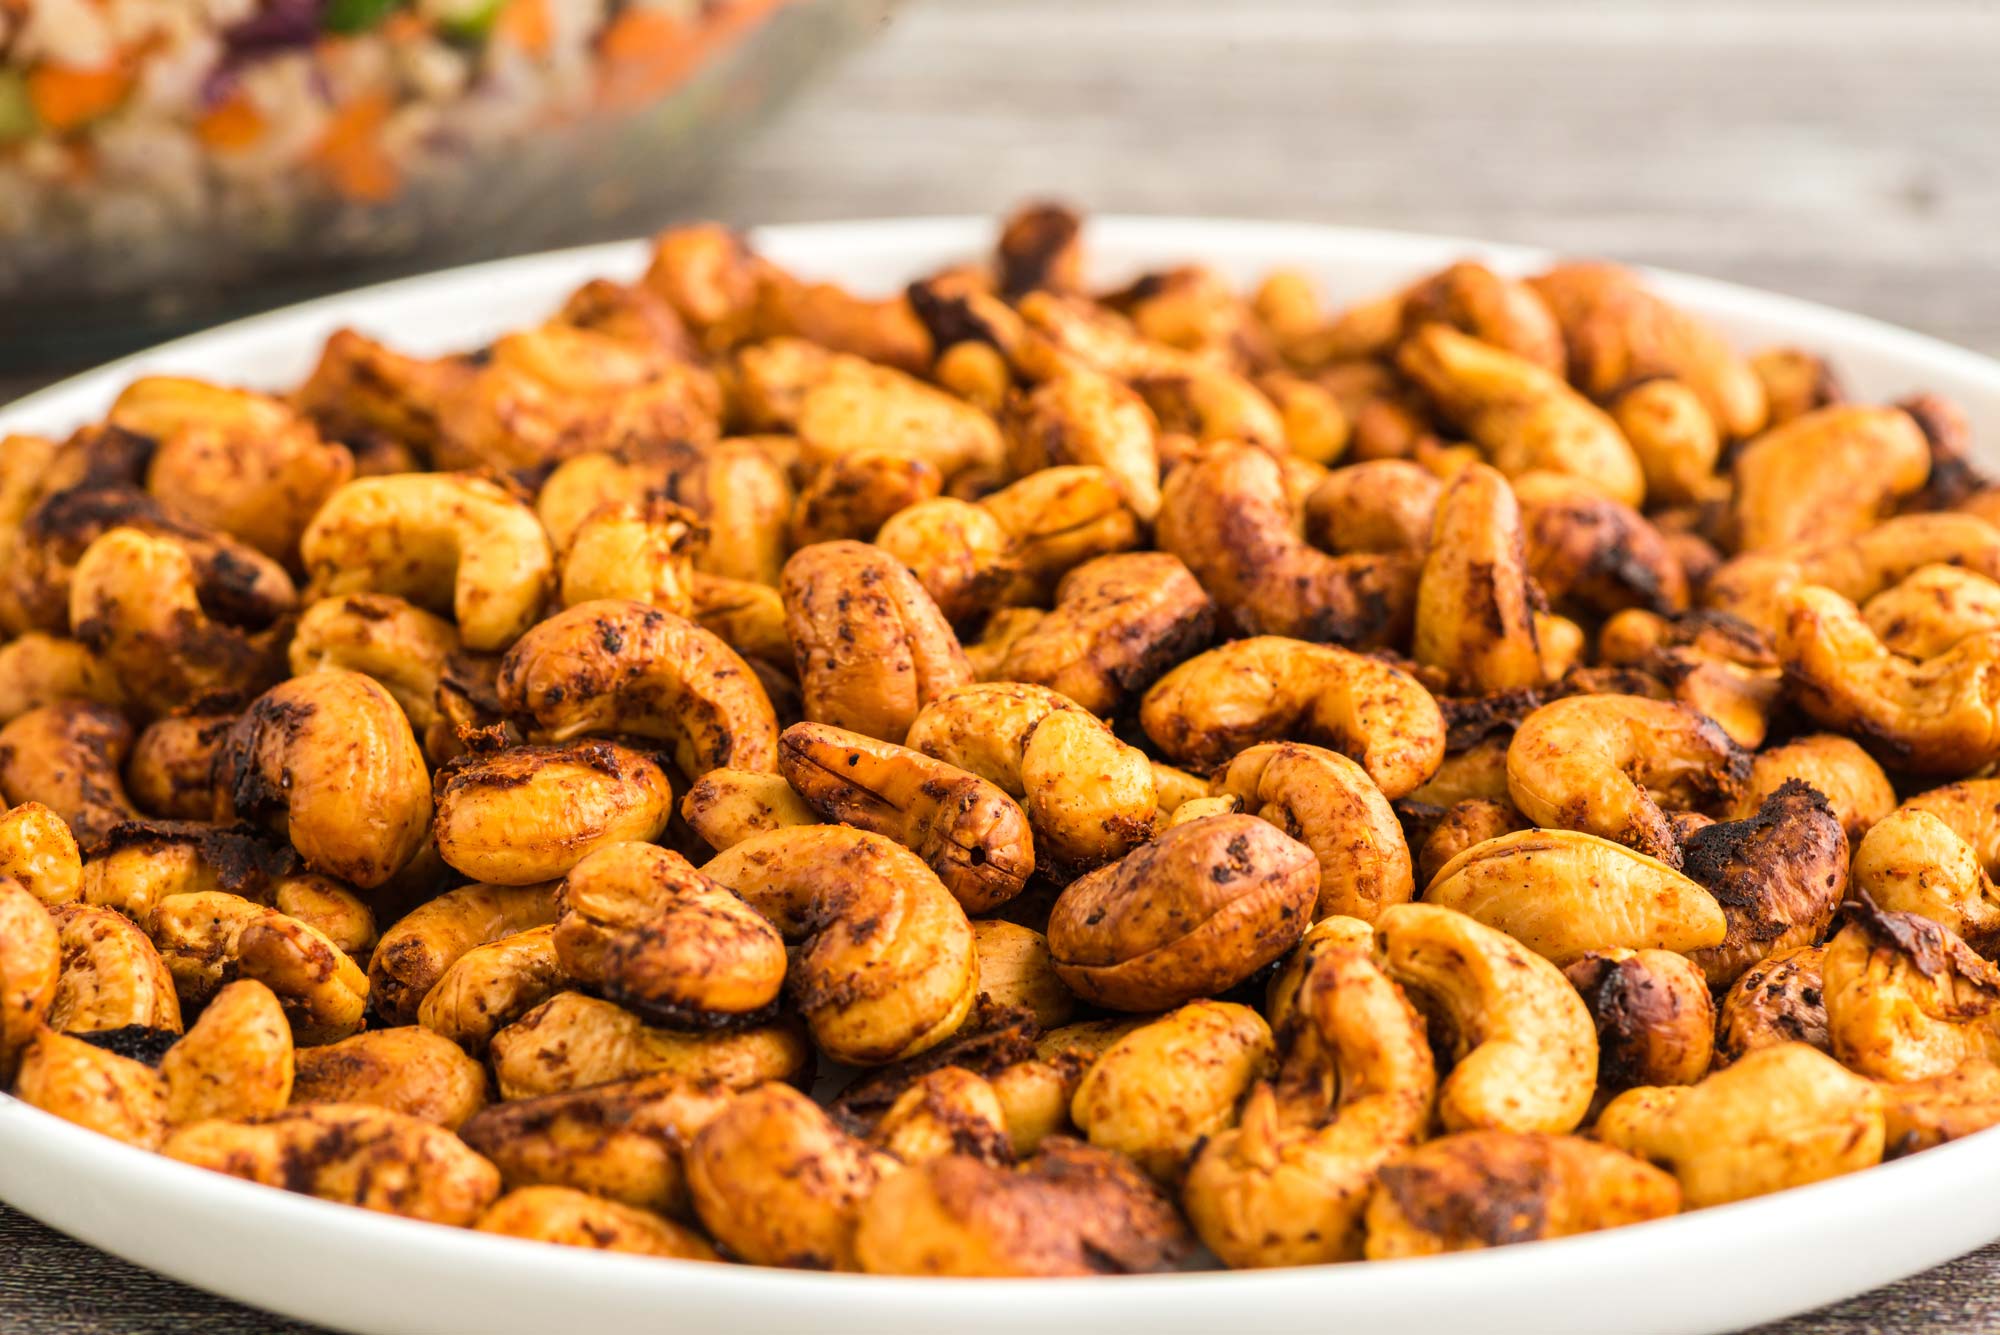 chili spiced cashews on plate